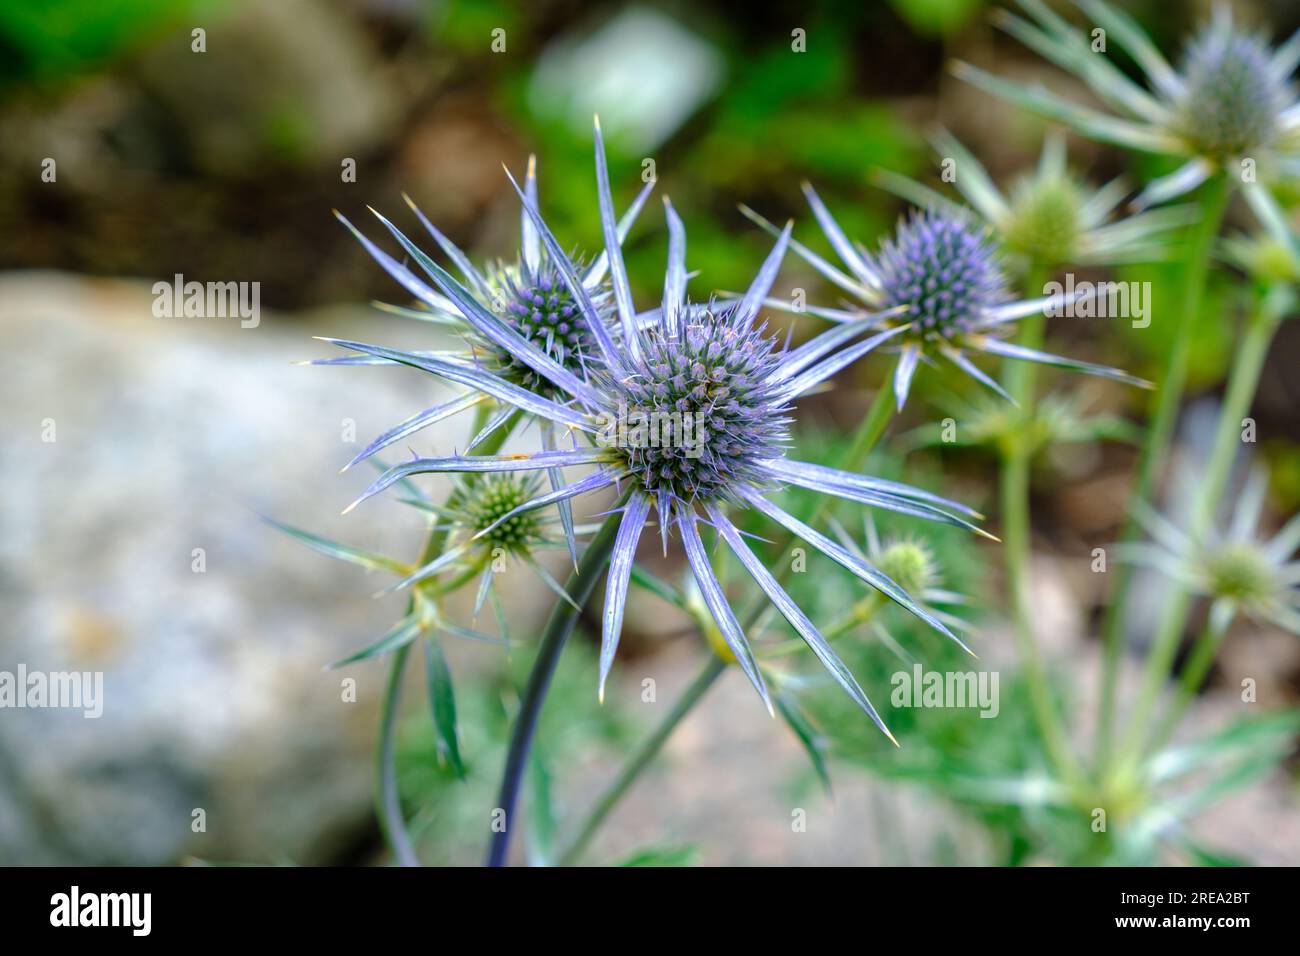 Close-up of flowers and bracts of sea holly, Eryngium zabelii cultivar Big Blue. Flowers of beautiful color. Stock Photo